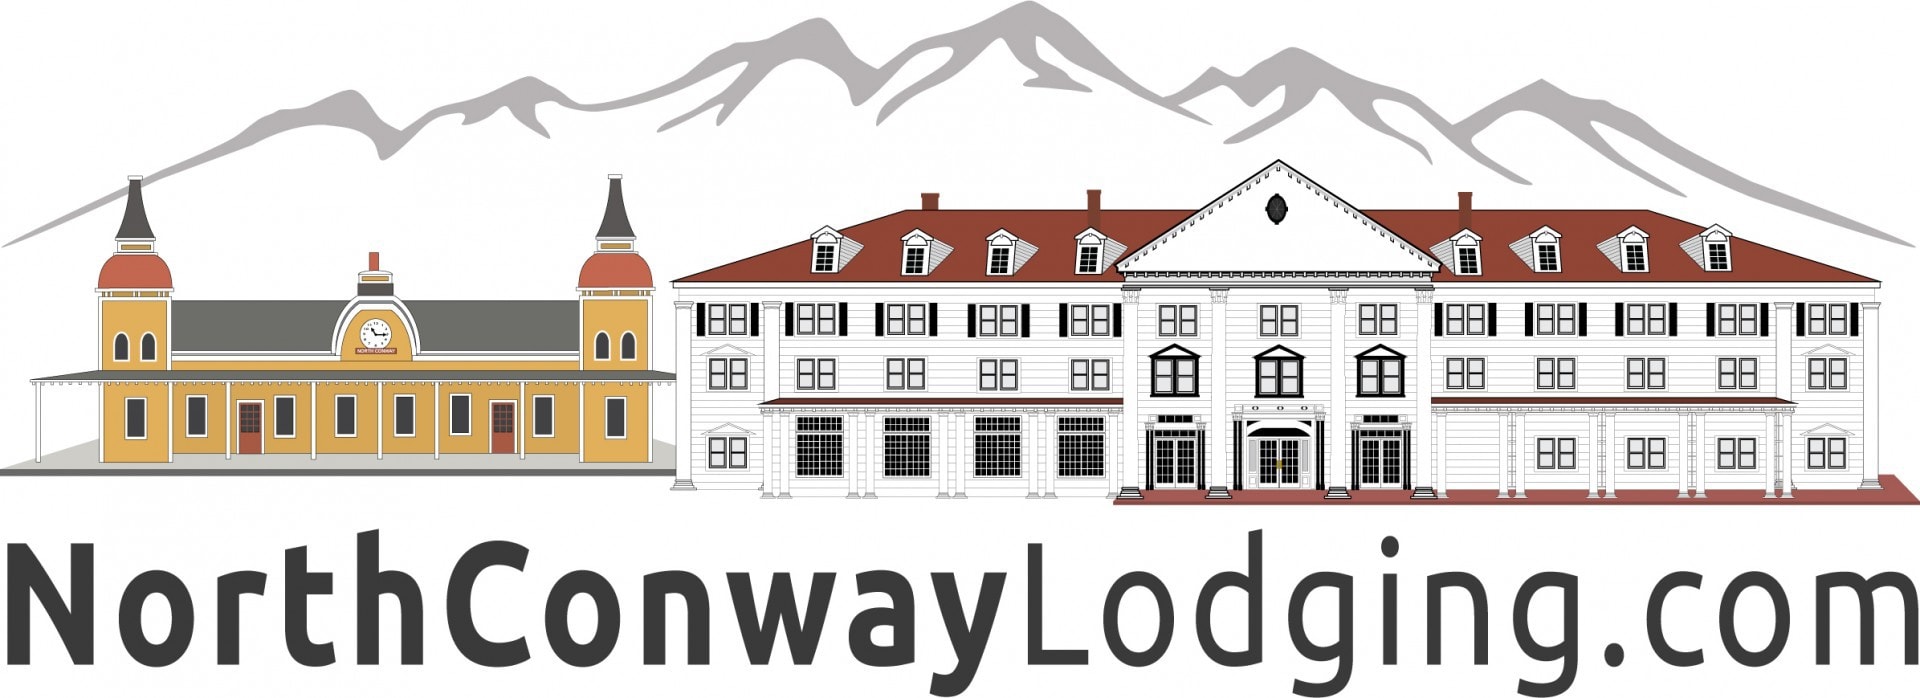 North_Conway_Lodging